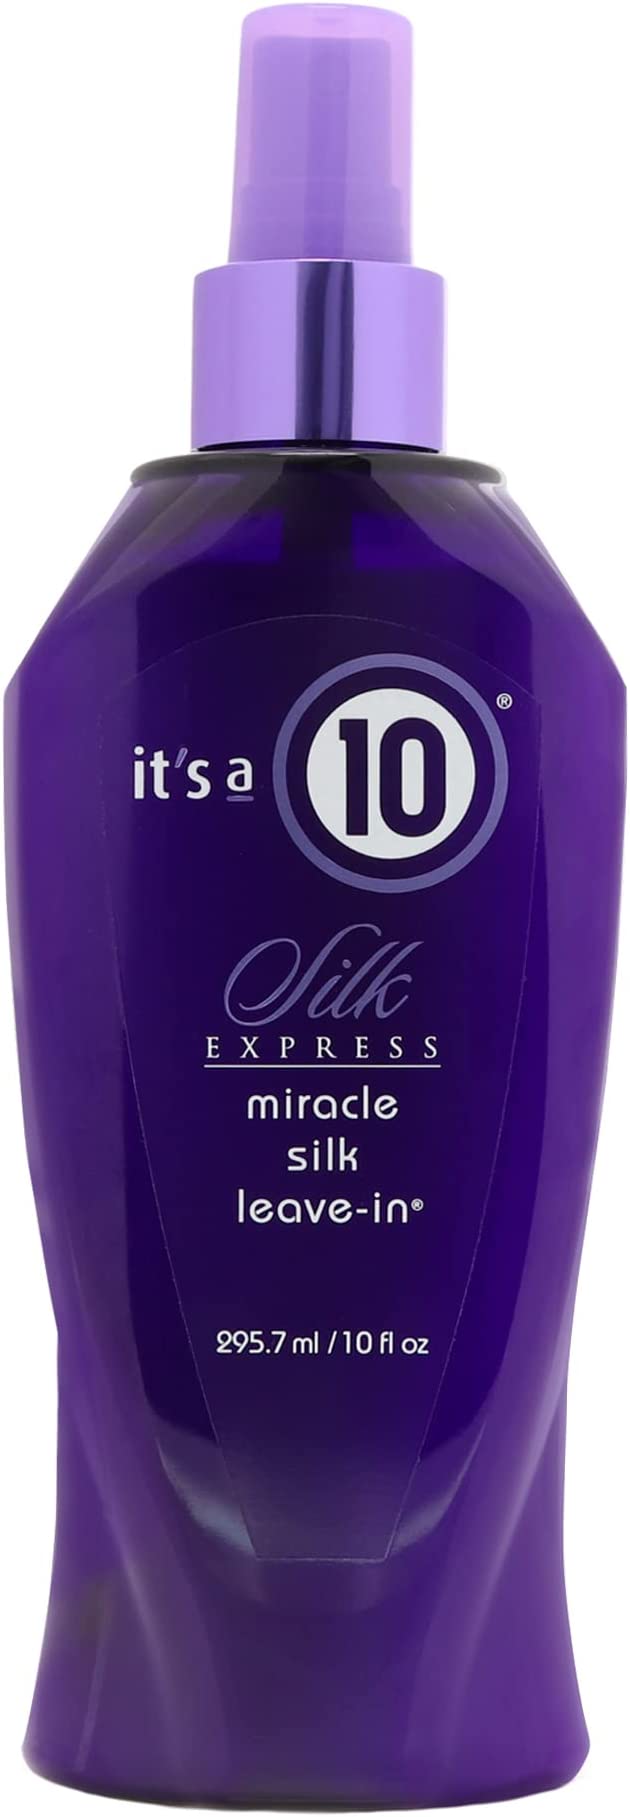 It's a 10 - Miracle Silk Leave in Conditioner